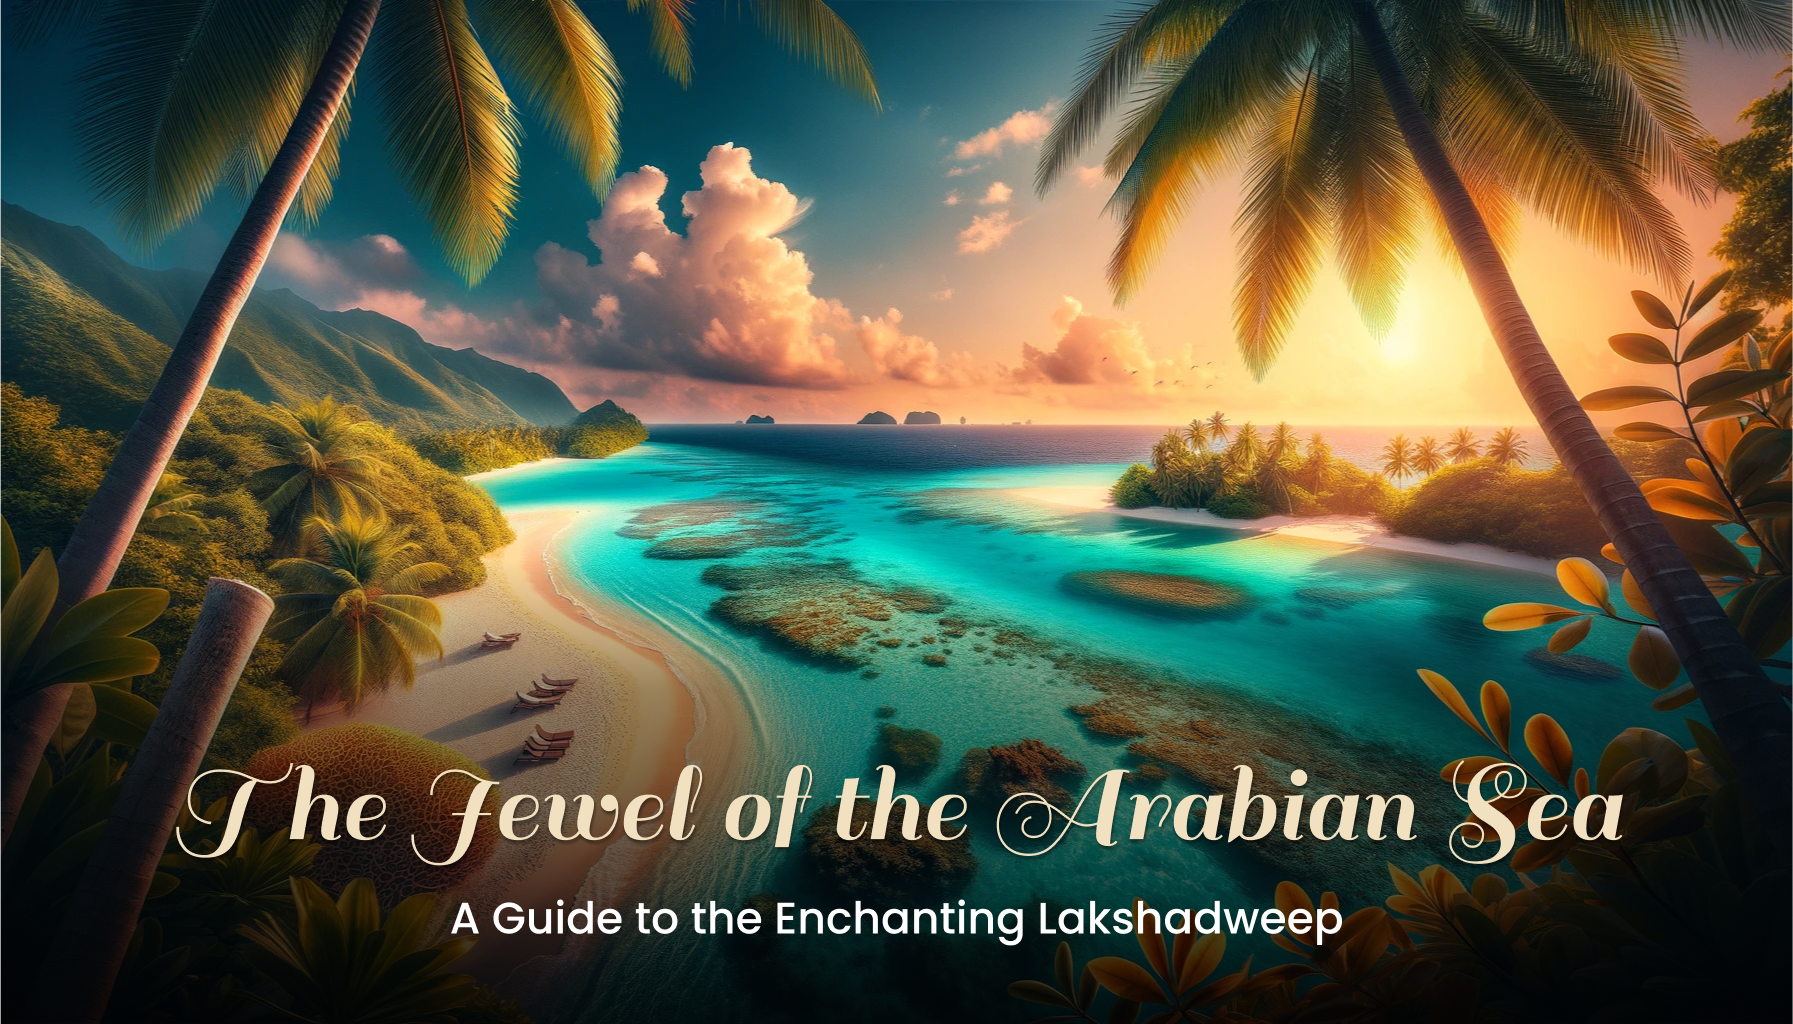 The Jewel of the Arabian Sea: A Guide to the Enchanting Lakshadweep